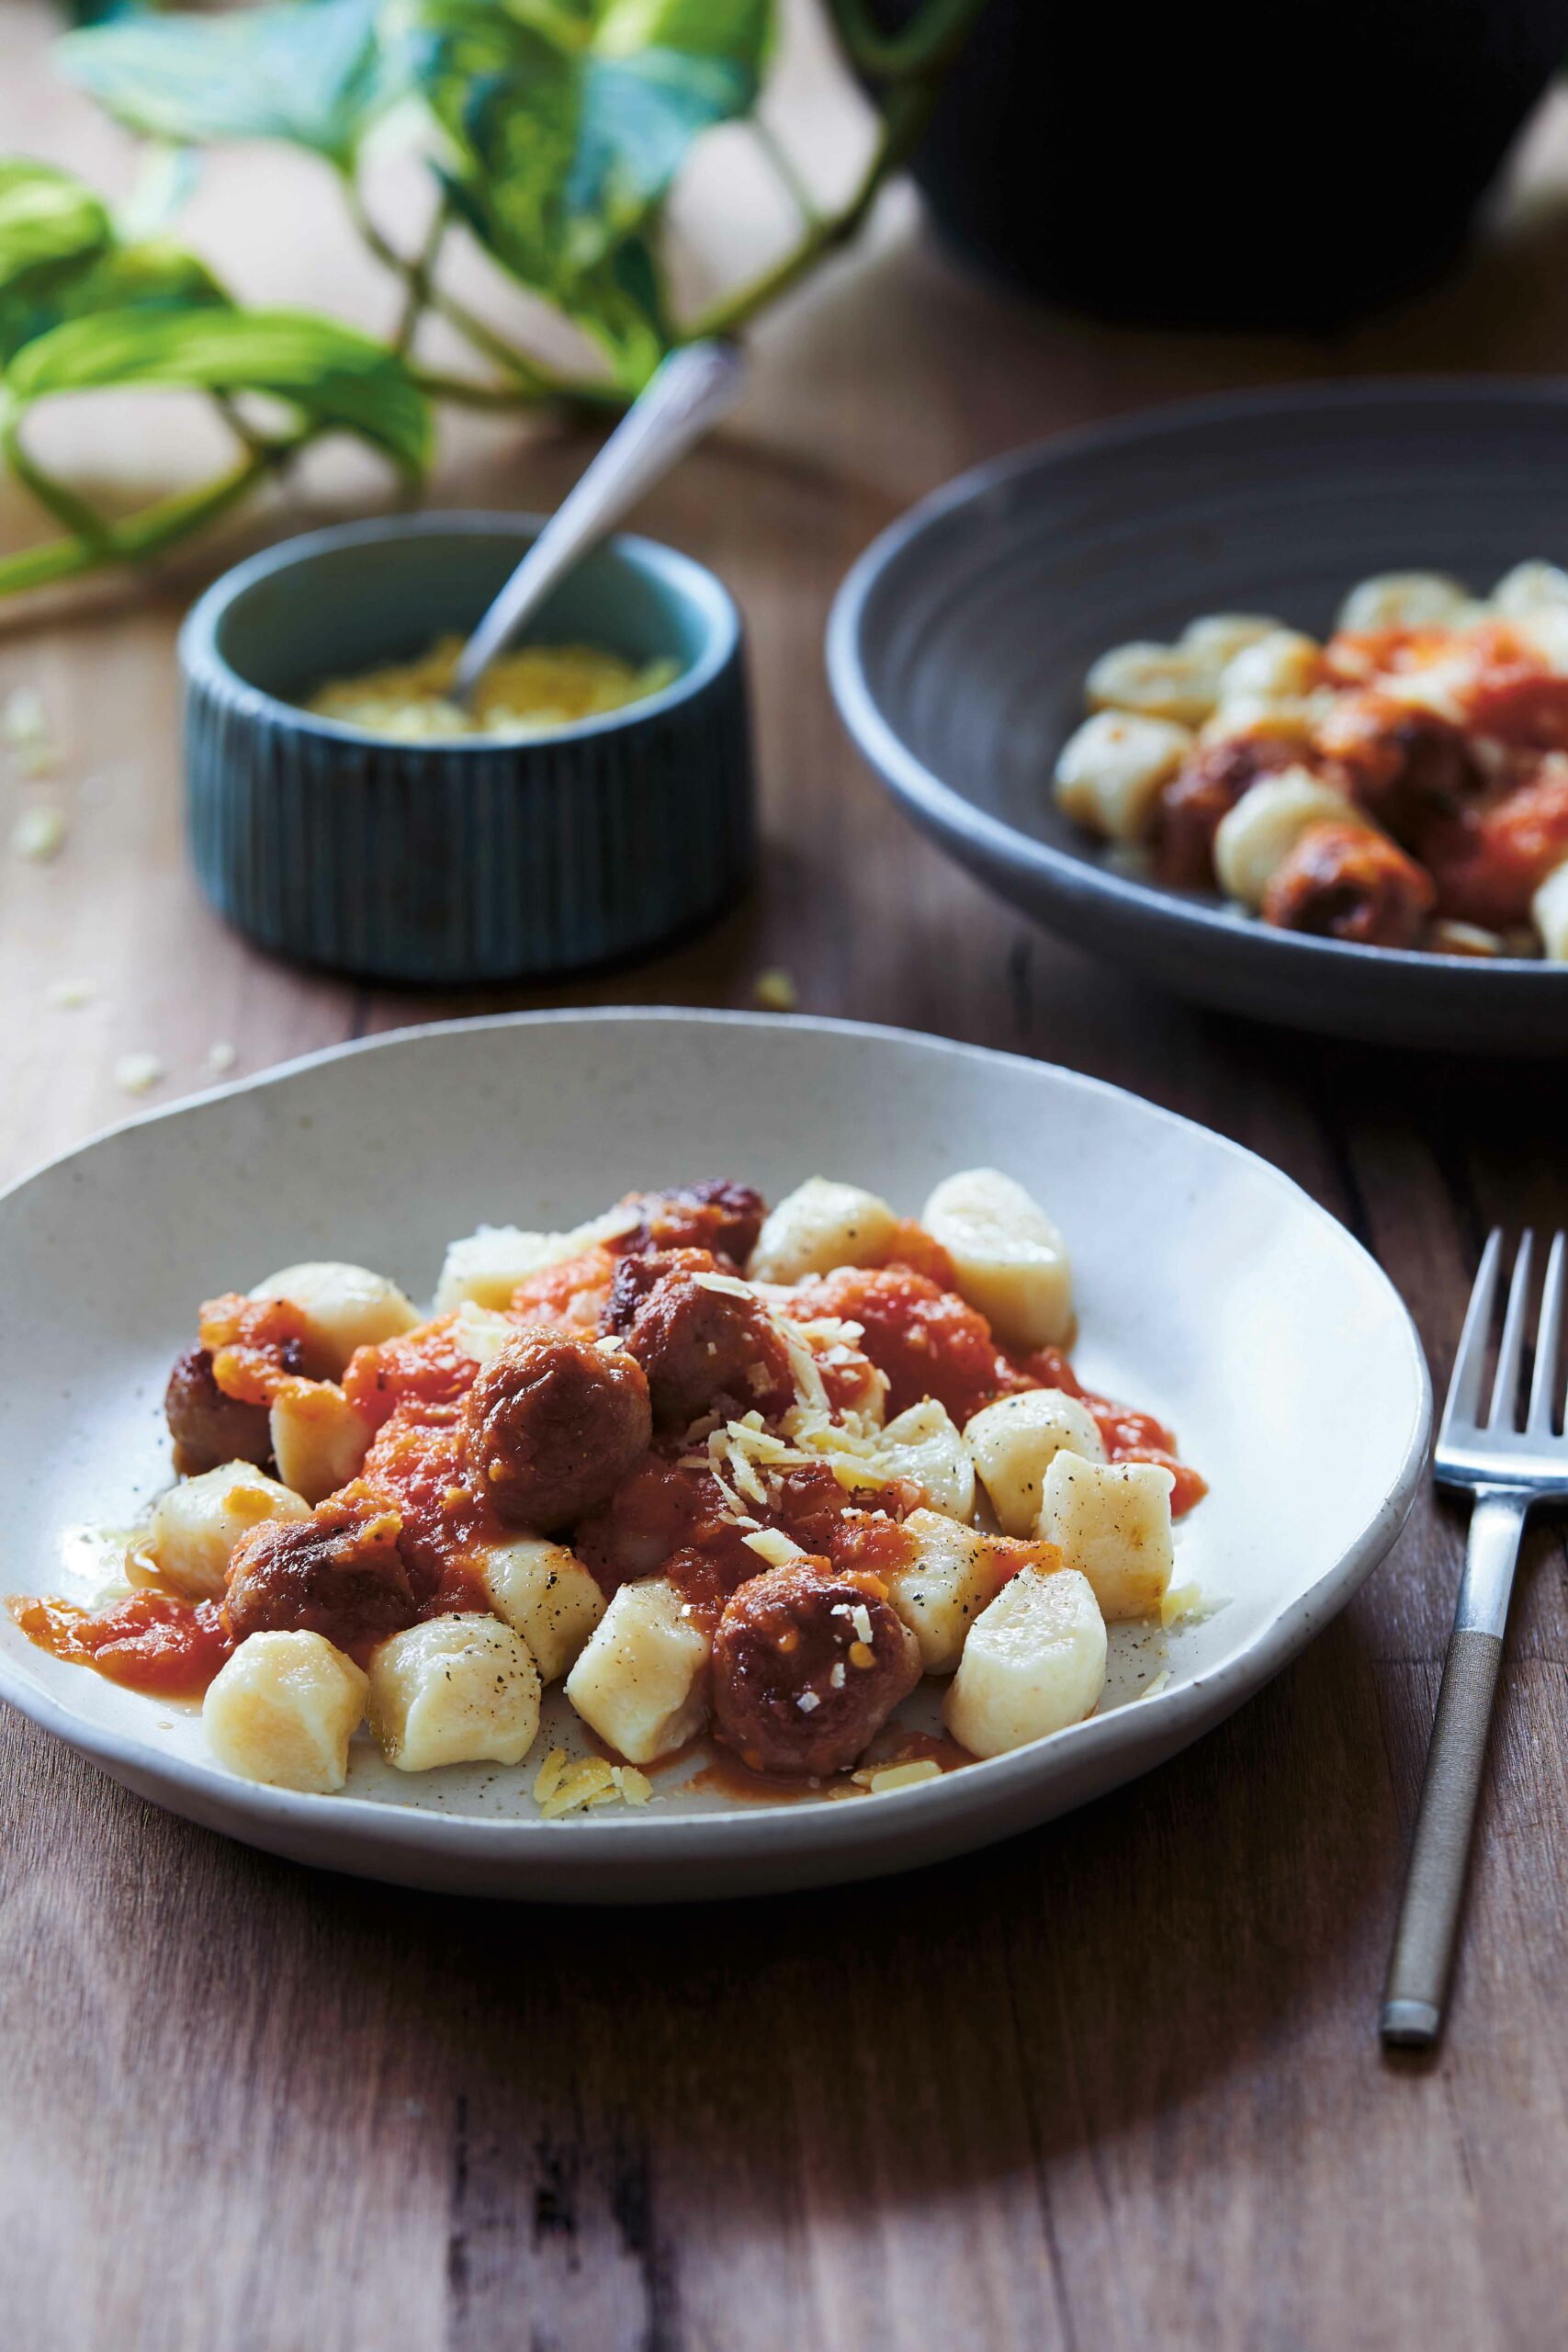 Gnocchi Recipes, Easy Gnocchi, Scroll Recipe, Use It All, Dinner Recipes, Dessert Recipes, Sustainable Cooking, Best Of Recipes